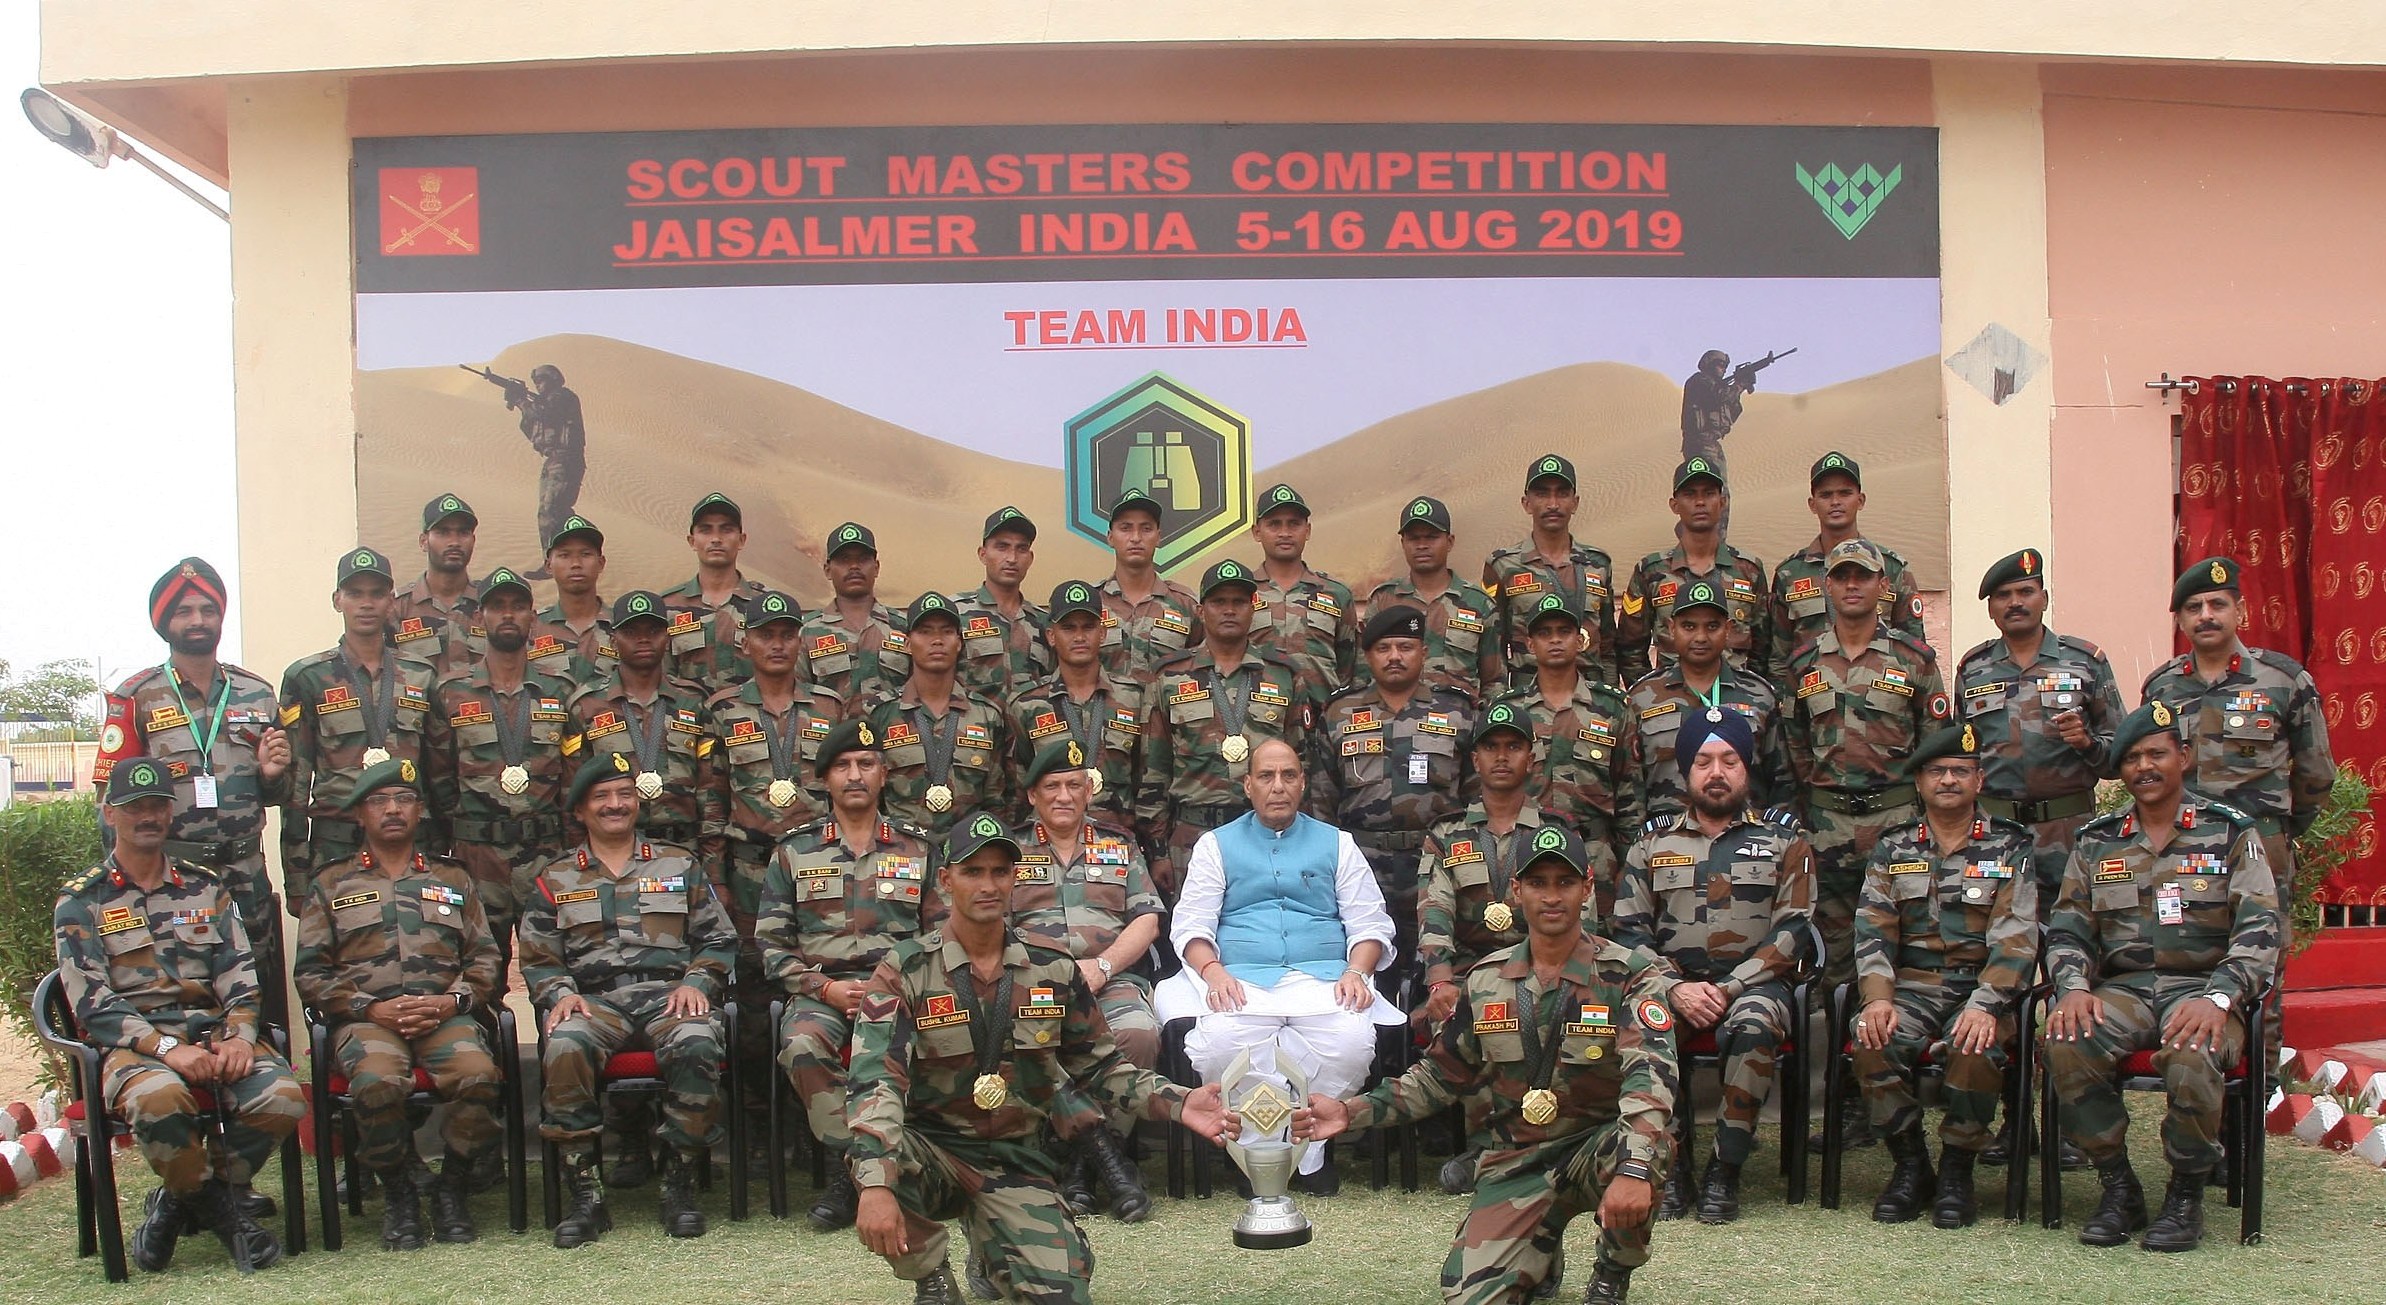 5TH Army International Scout Masters competition concludes at Jaisalmer Military station